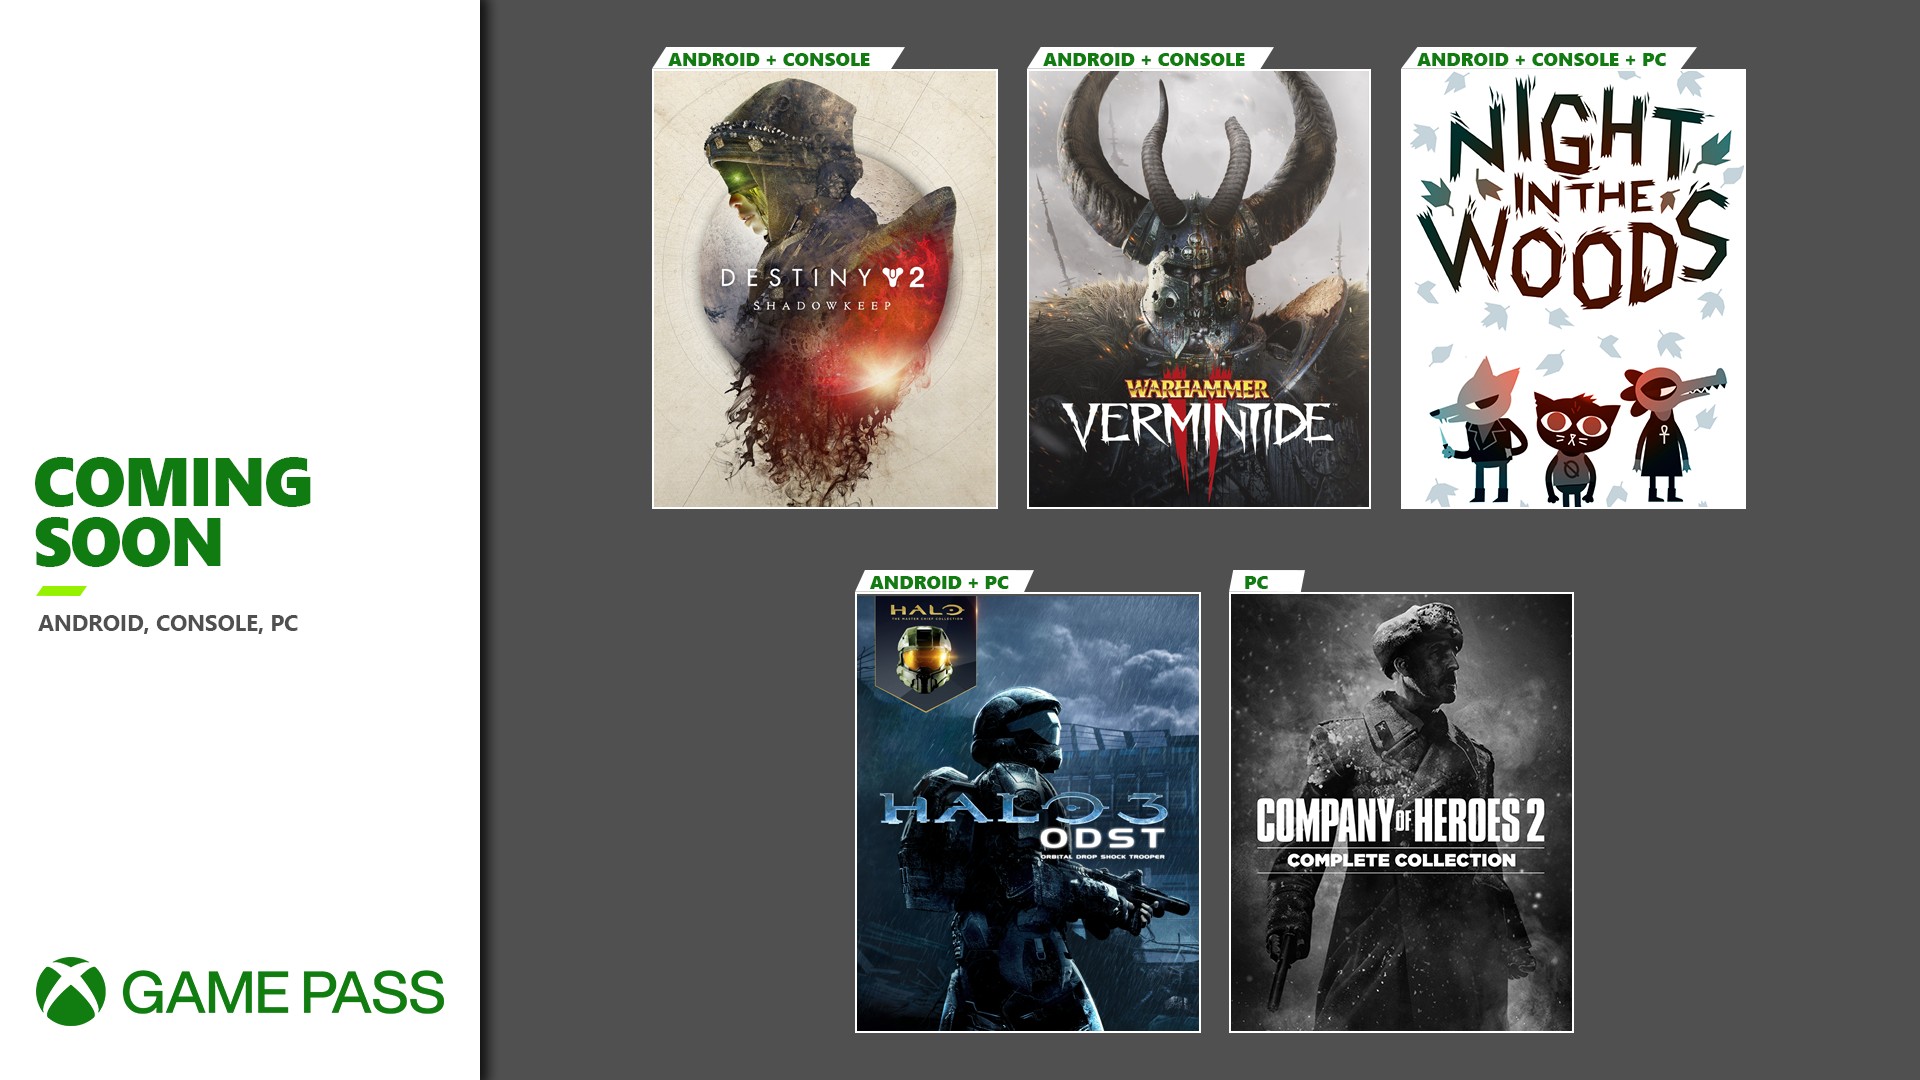 Coming Soon To Xbox Game Pass Cloud Gaming Destiny 2 Night In The Woods Company Of Heroes 2 And More Xbox Wire - roblox gamepasses manager